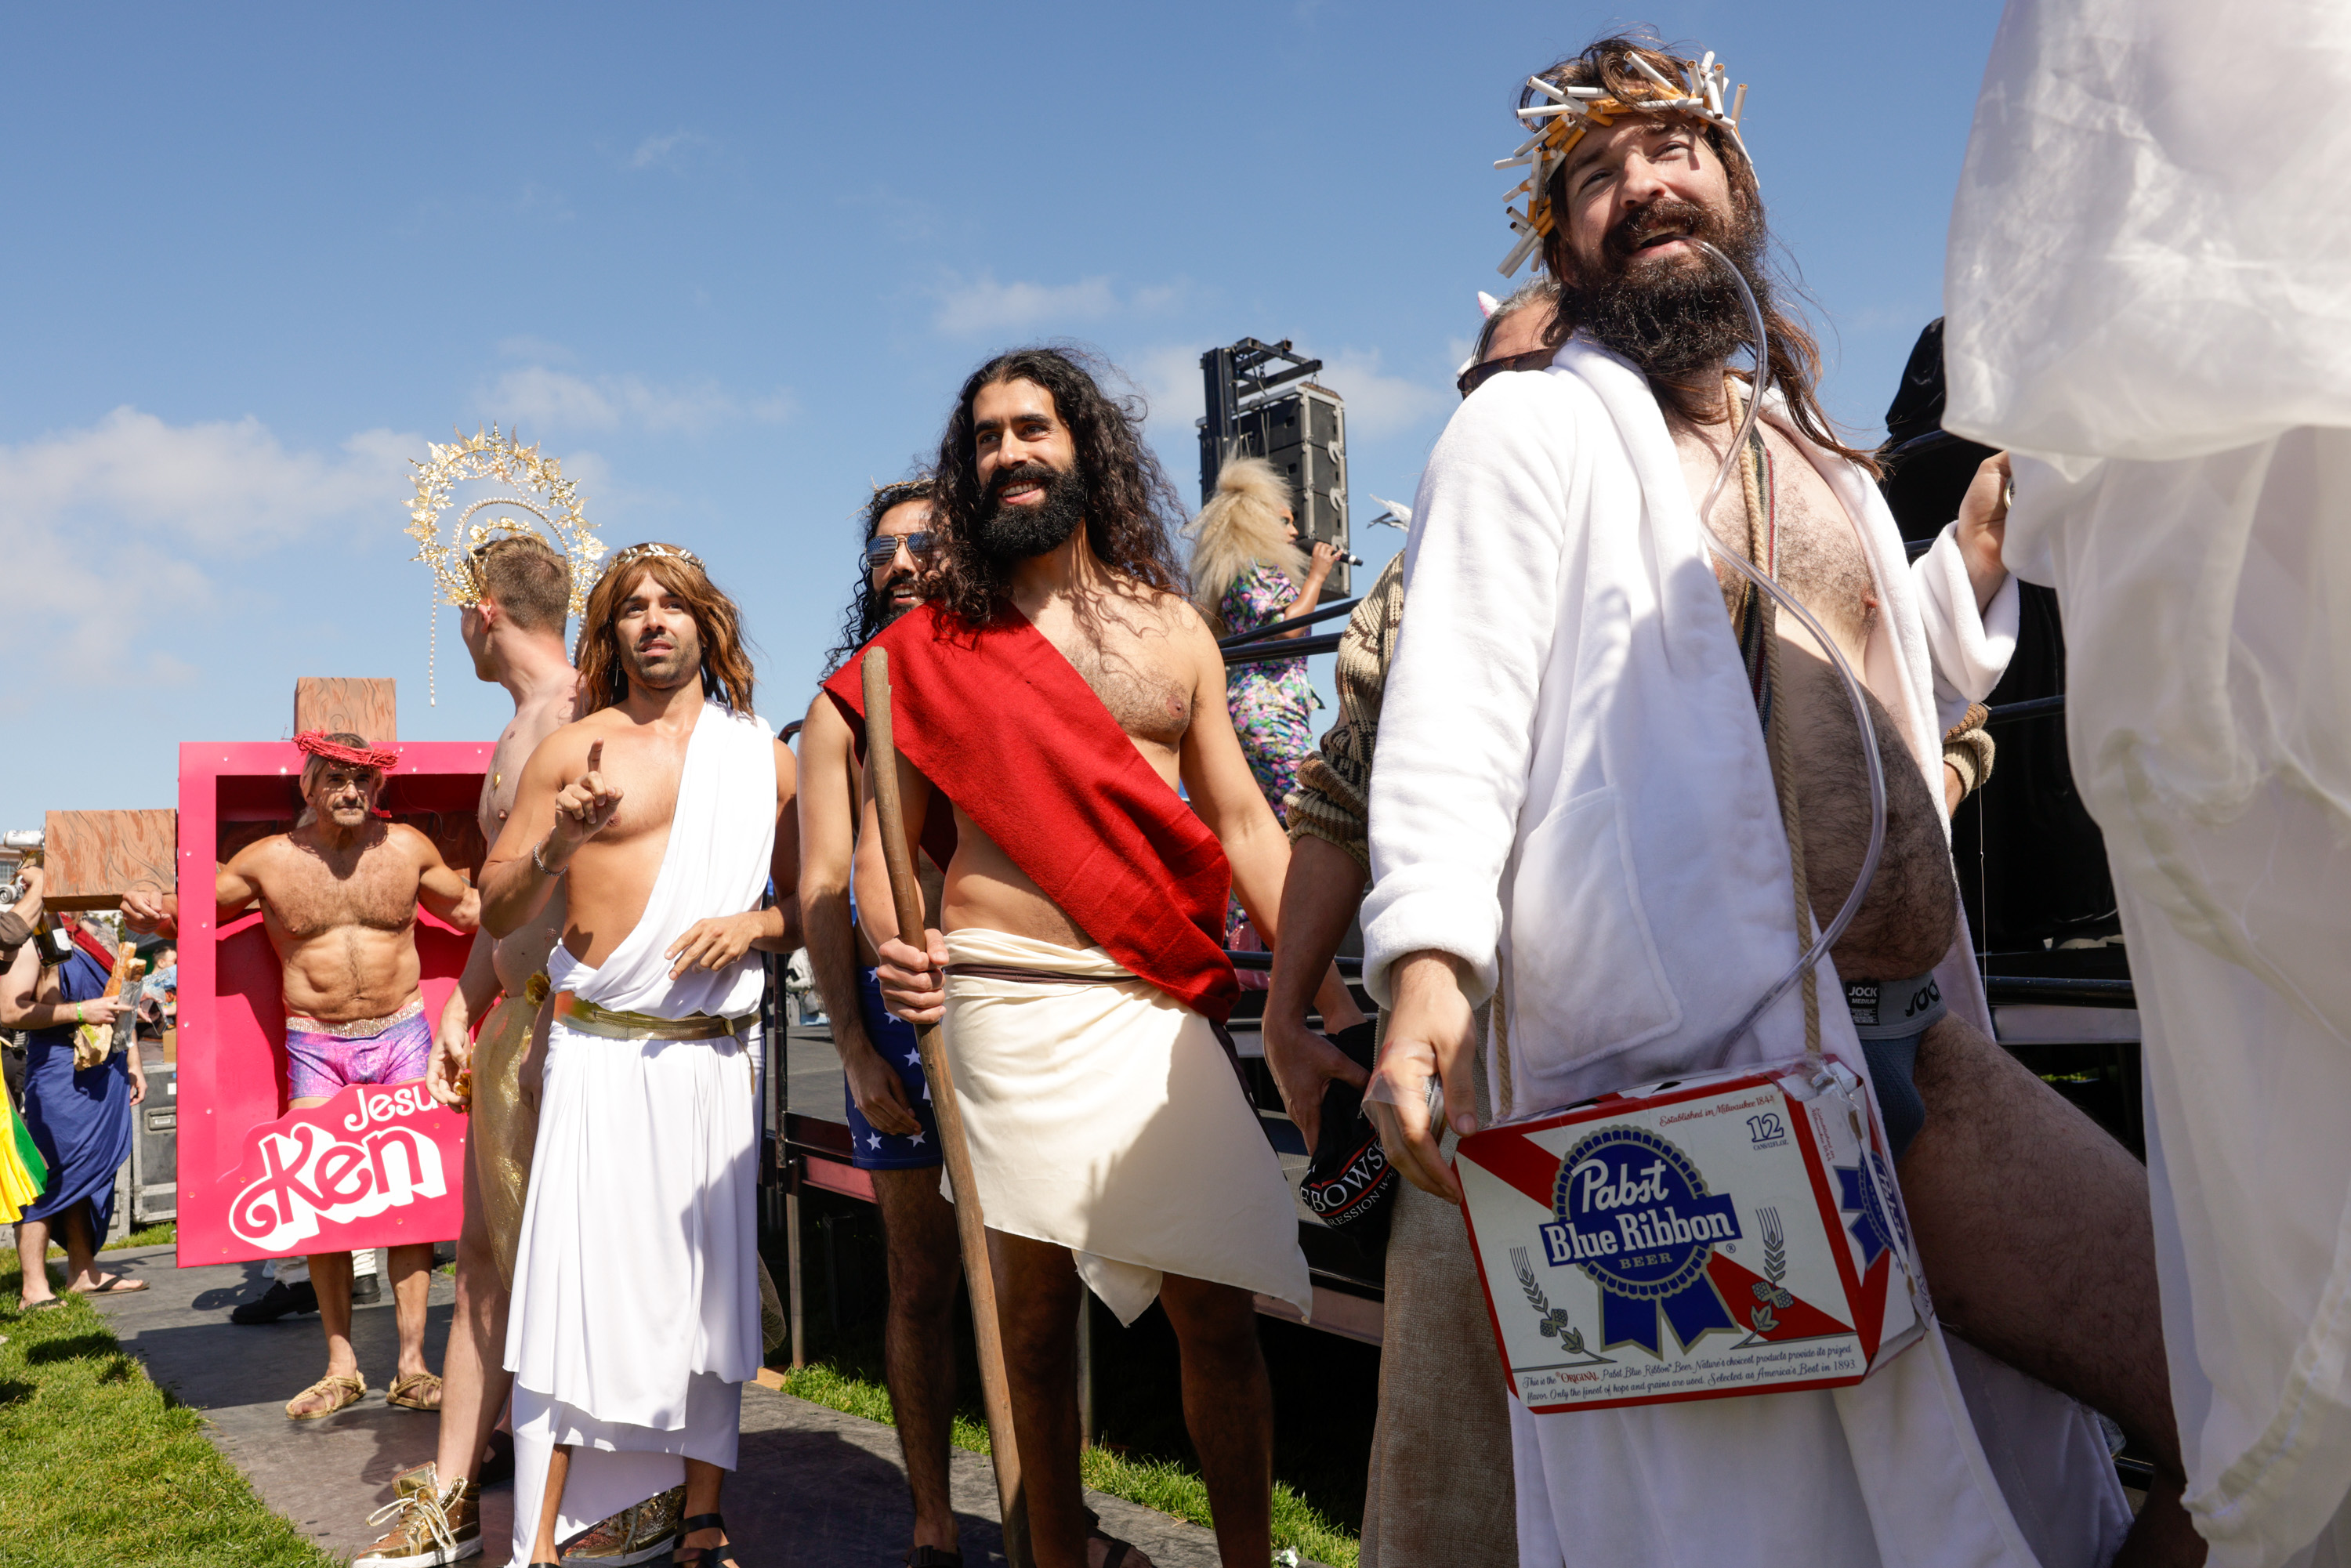 A group of people in white robes and fake beards, portraying different interpretations of Jesus, gather for an event.